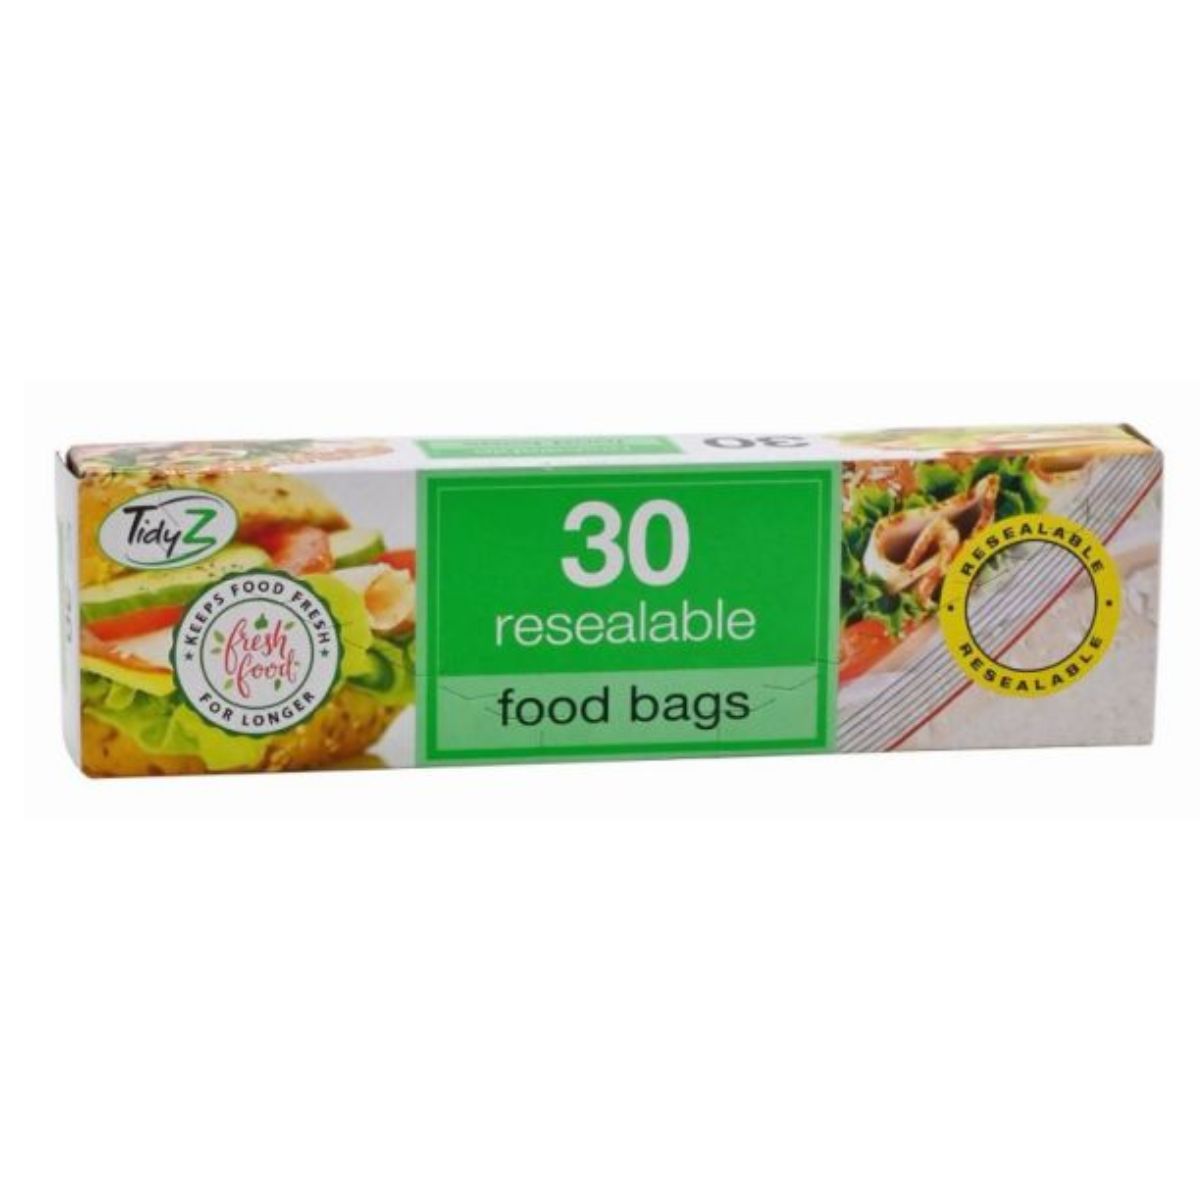 Box of 30 Tidyz - Ultimate Strength Resealable Food Bags - 19 x 17cm from tidy z.